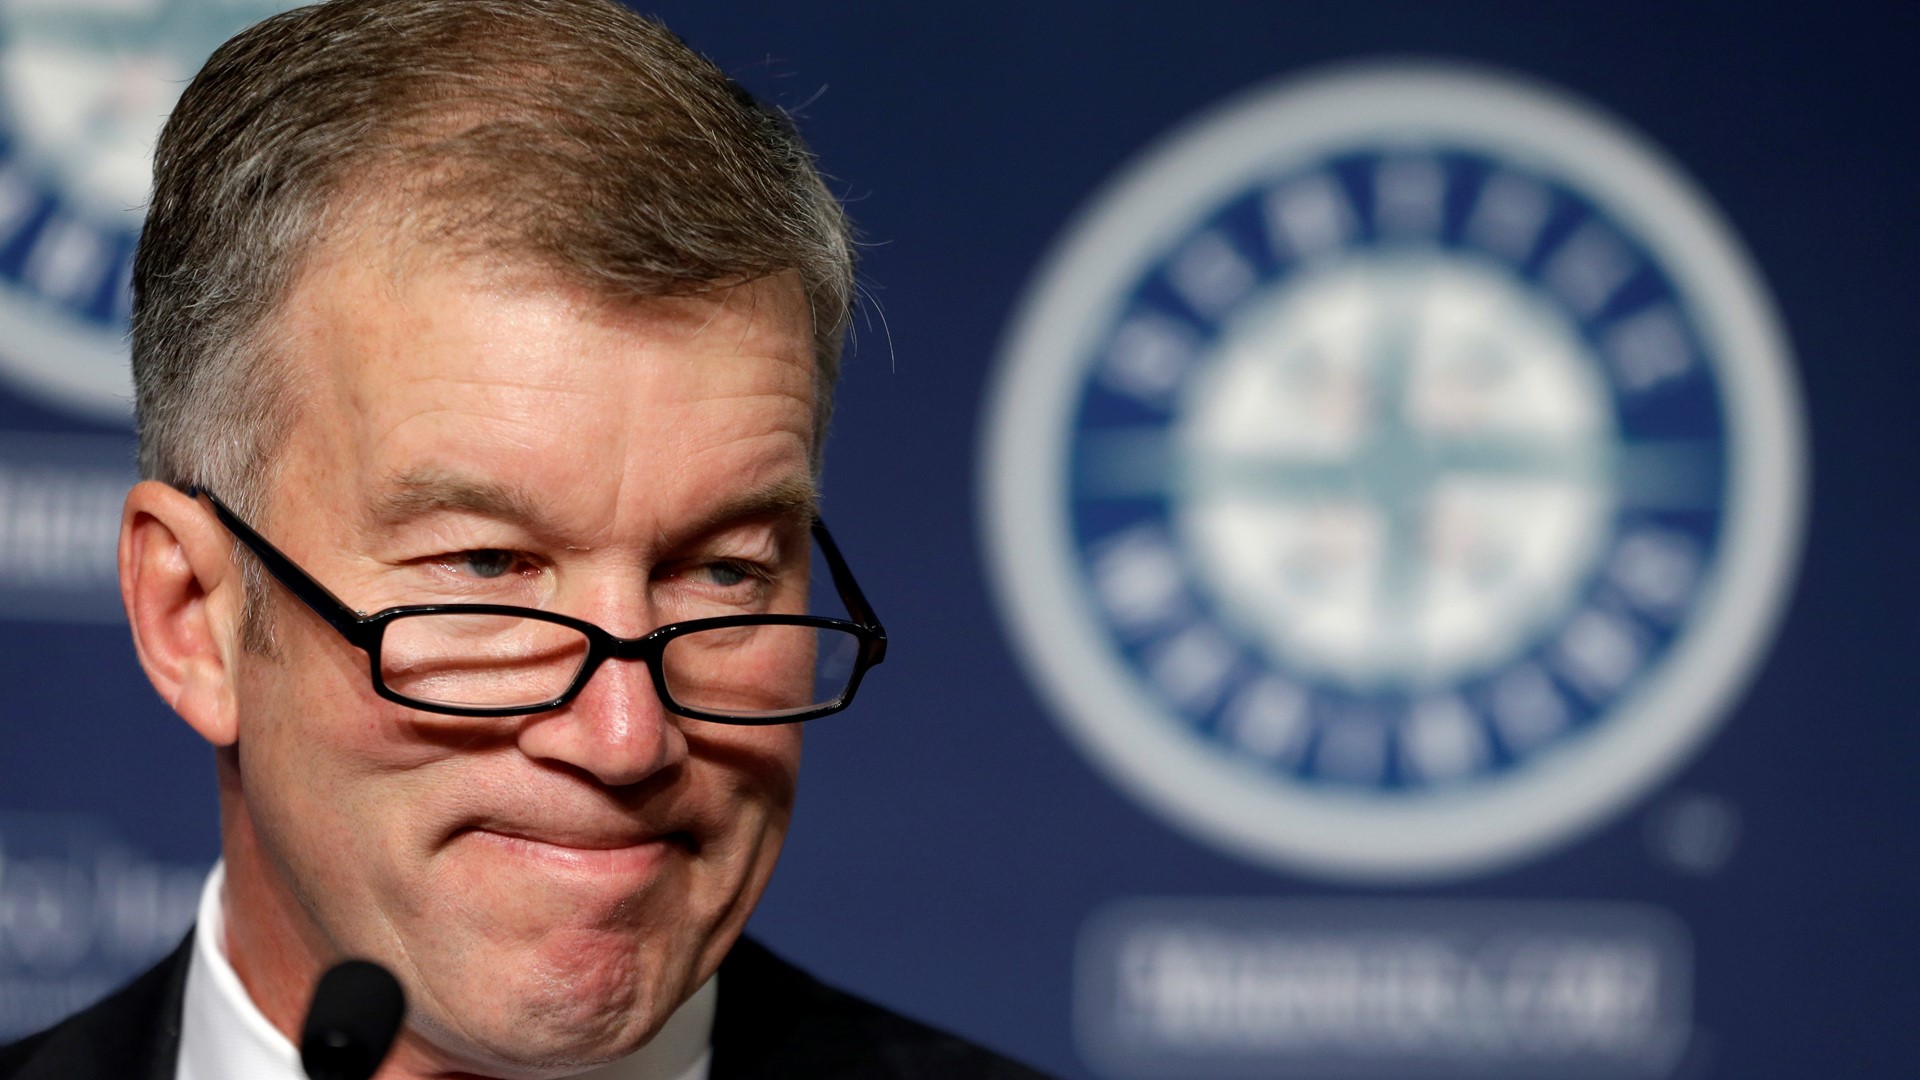 Seattle Mariners CEO Kevin Mather has been apologizing to various people he offended with some comments he made to a Rotary Club chapter, incl. Mariner Kyle Seager.